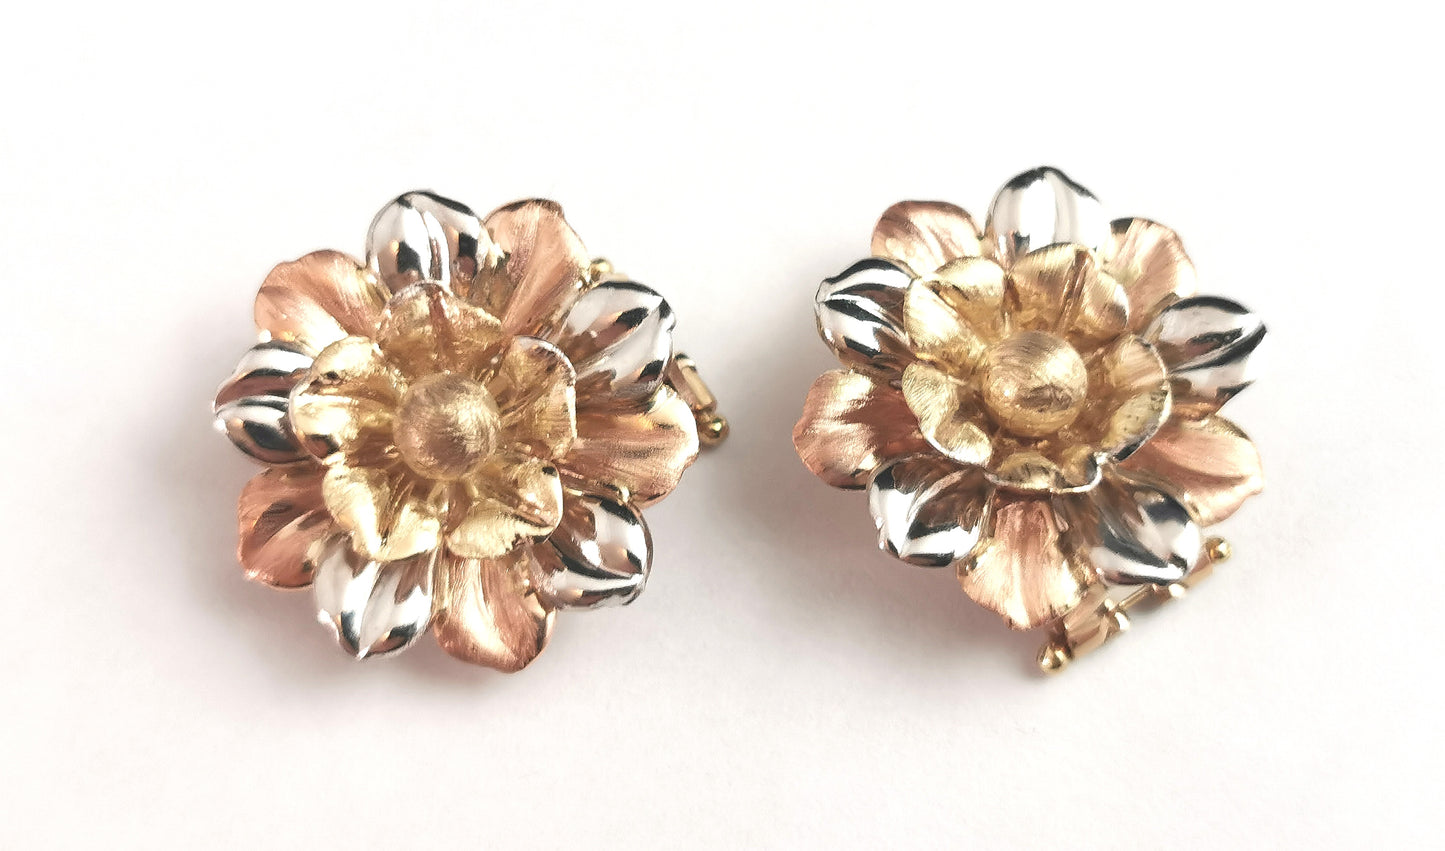 Flower clip on earrings, floral tri colour 9ct gold